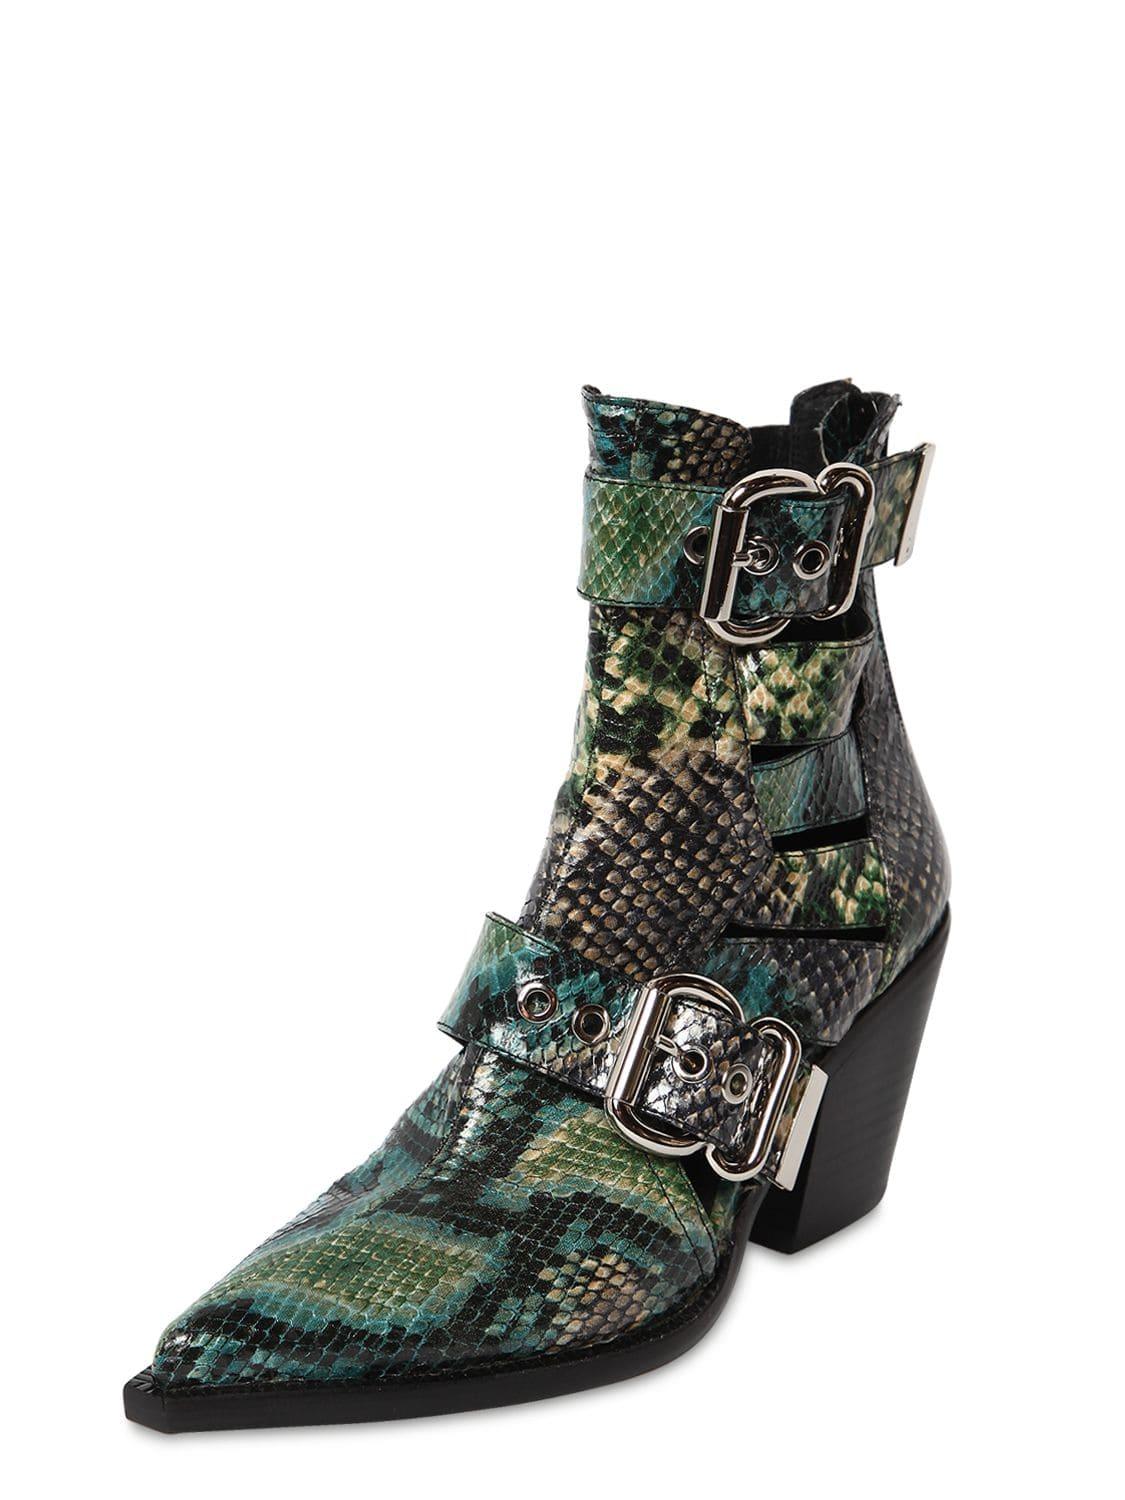 Jeffrey Campbell 75mm Guadalupe Snake Print Leather Boots in Green - Lyst